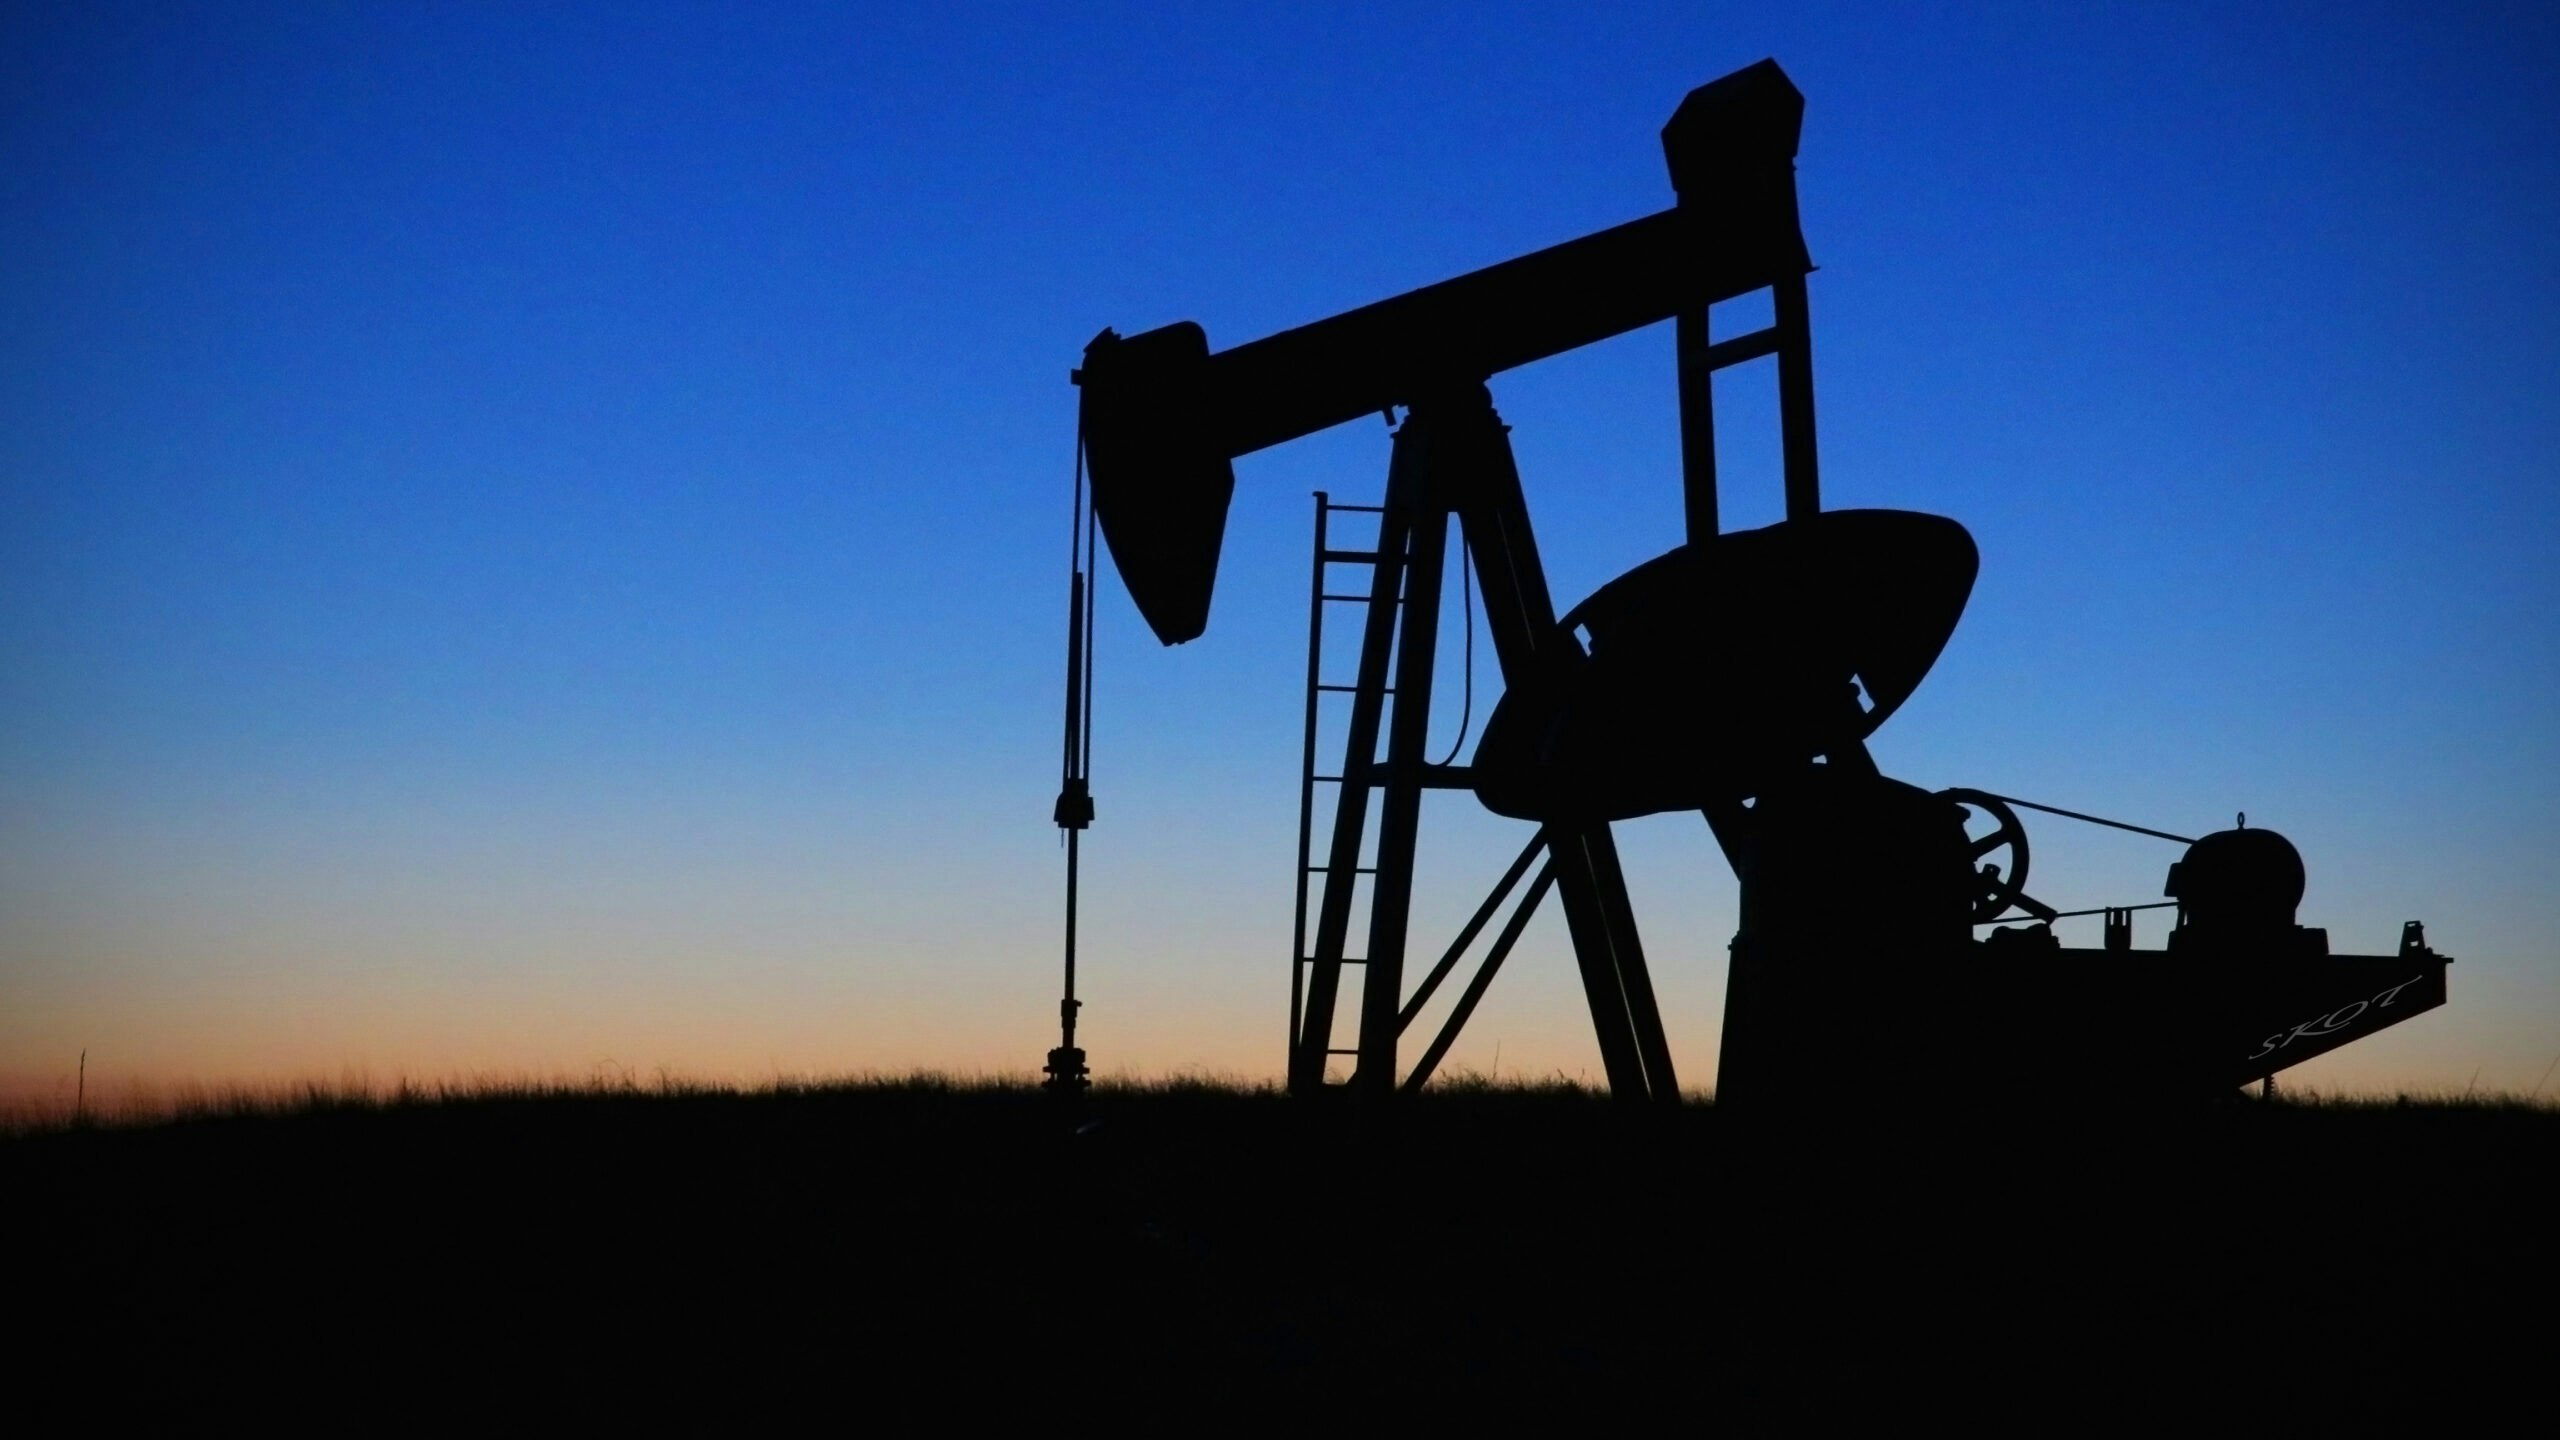 Canva Silhouette of a Pump Jack scaled